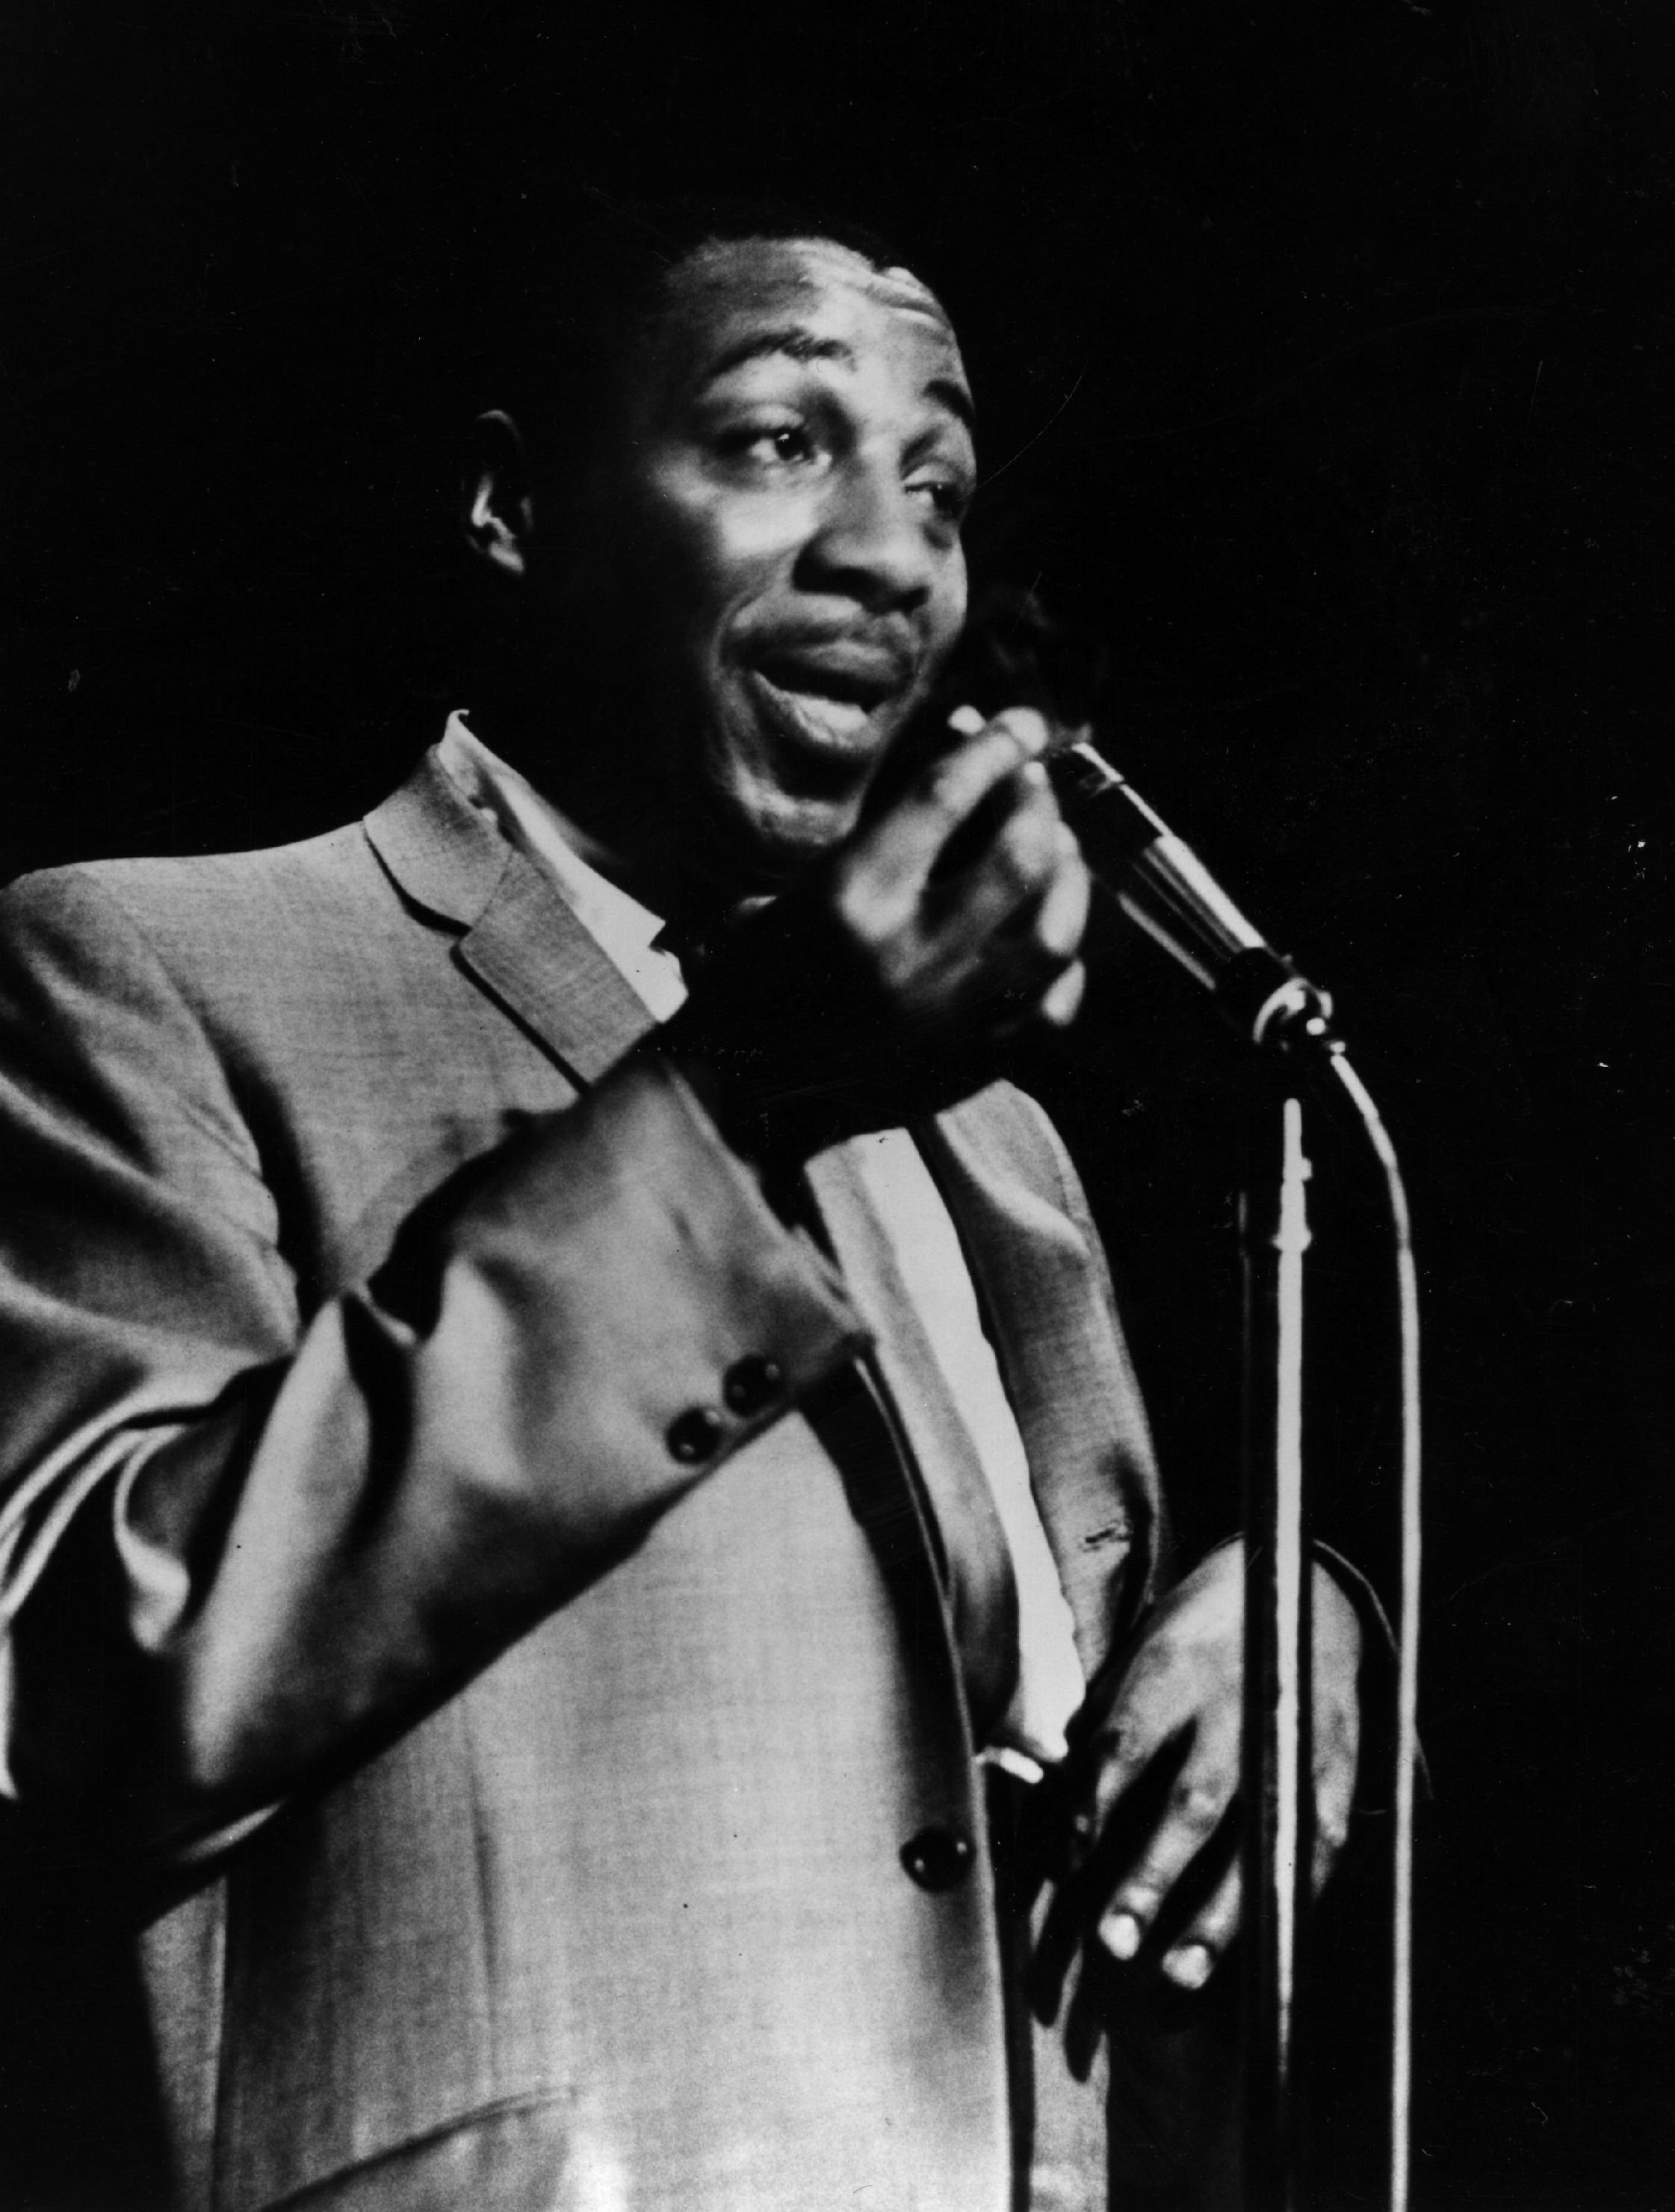 Comedian Dick Gregory at the microphone, 1962.